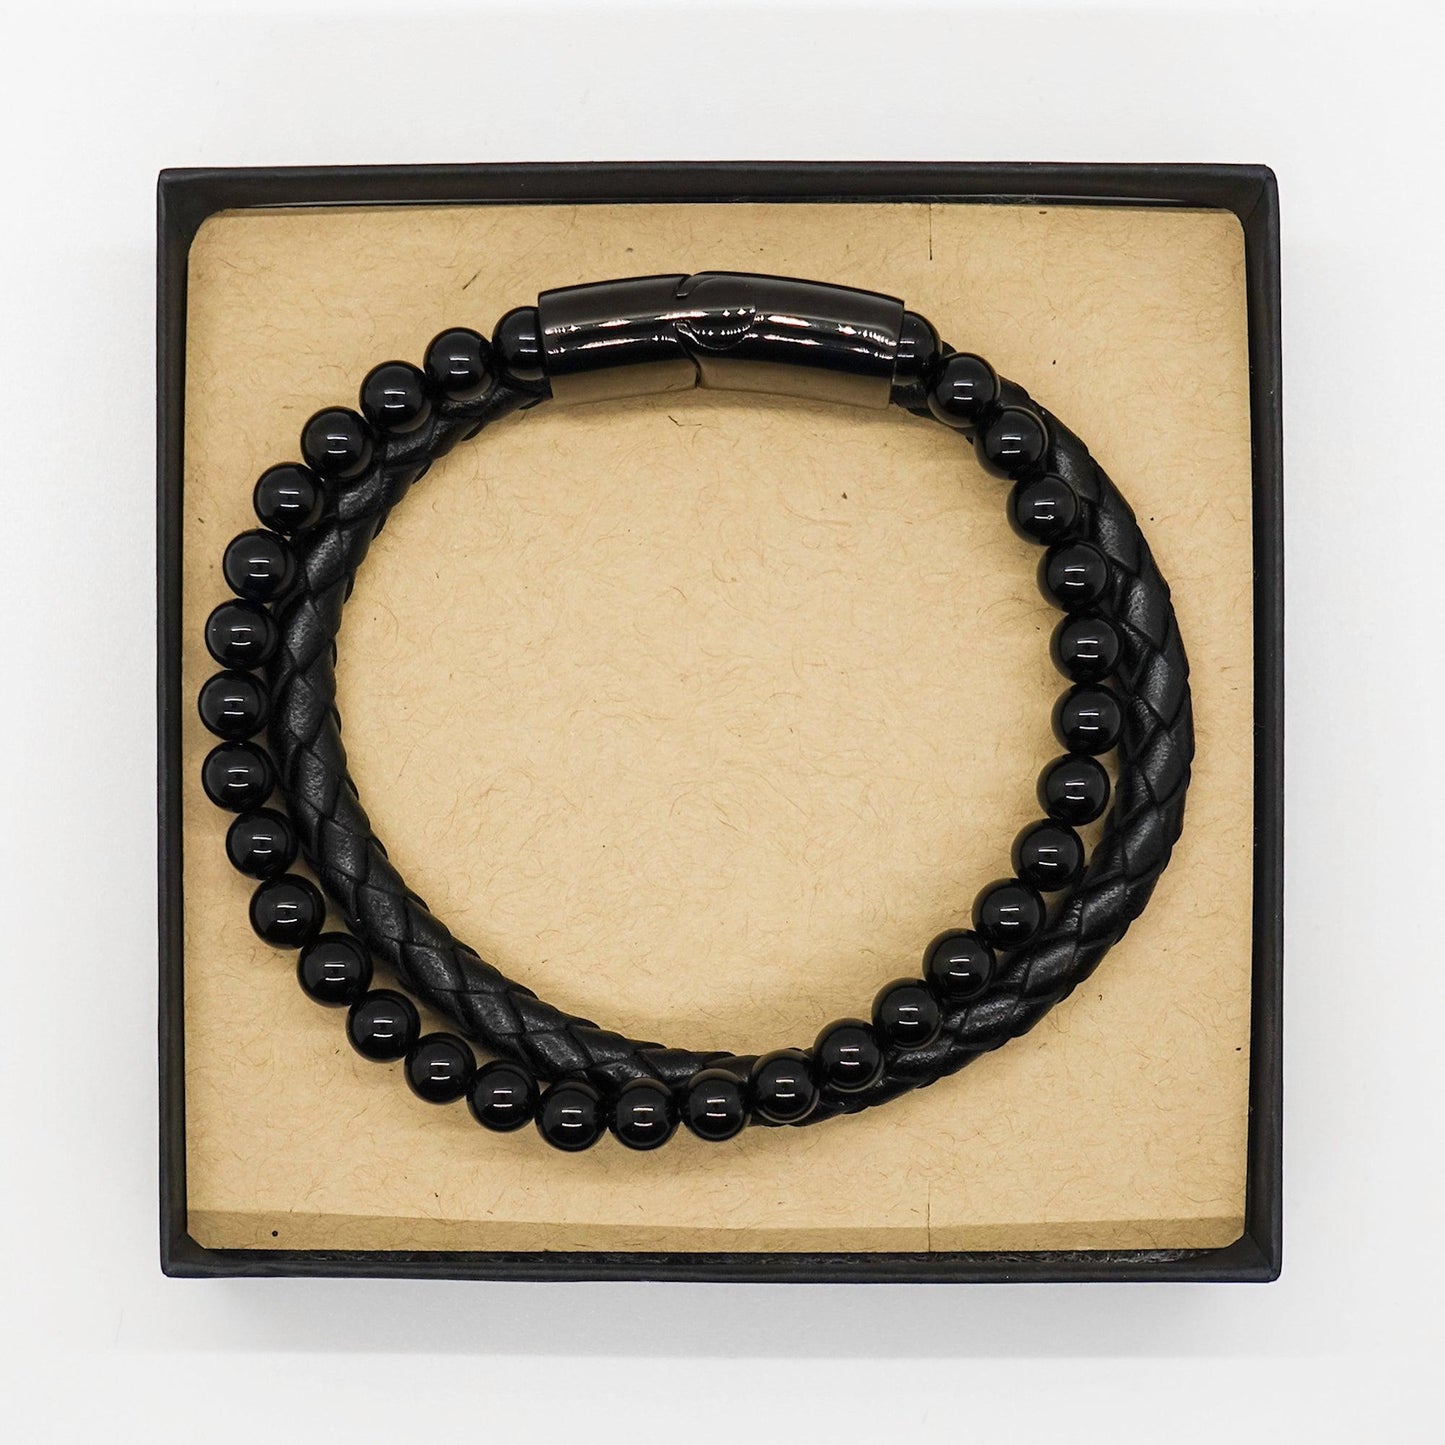 Concierge Black Braided Stone Leather Bracelet - Thanks for being who you are - Birthday Christmas Jewelry Gifts Coworkers Colleague Boss - Mallard Moon Gift Shop